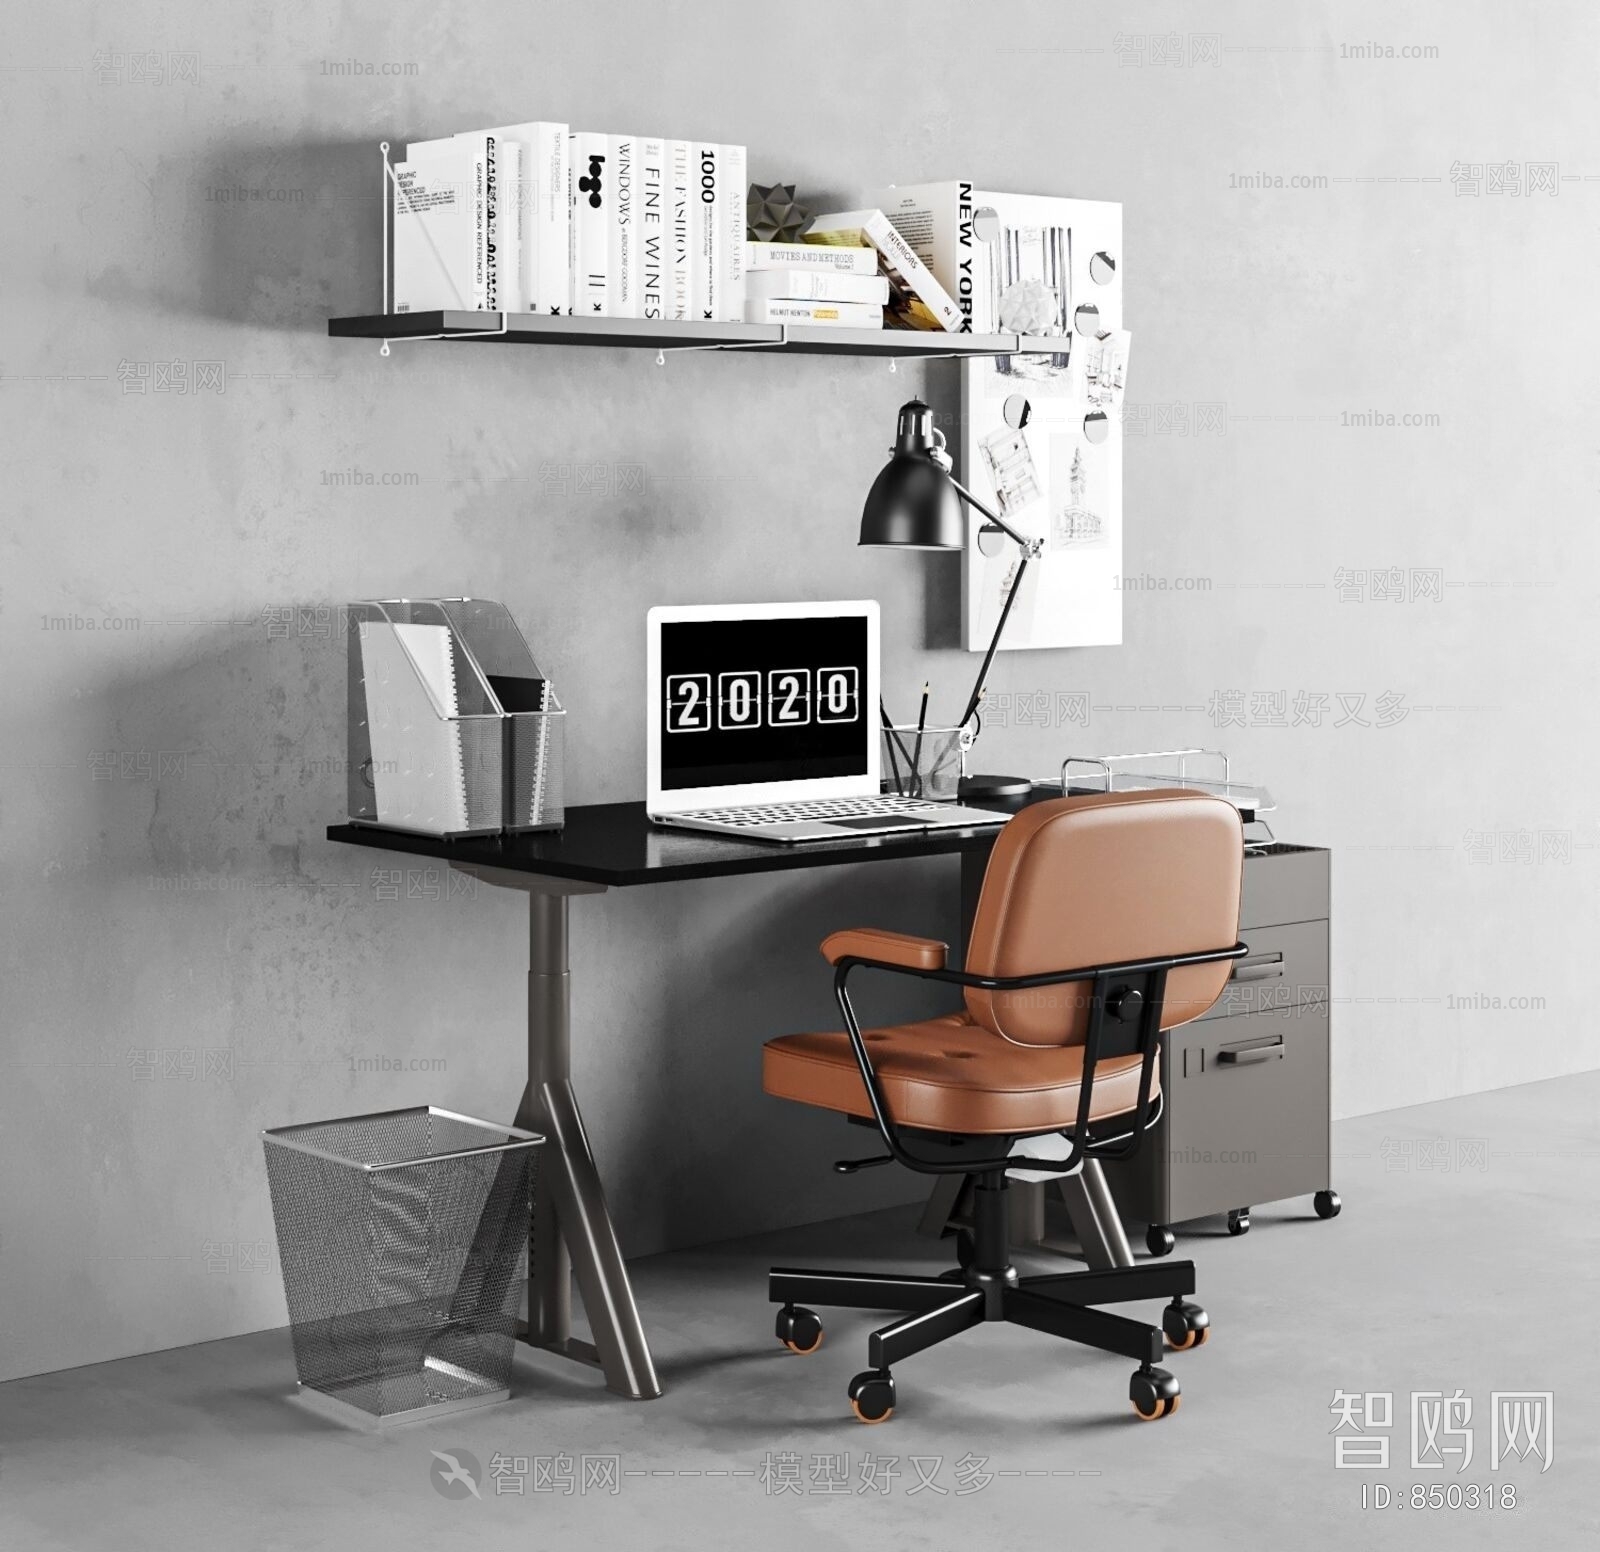 Industrial Style Office Chair